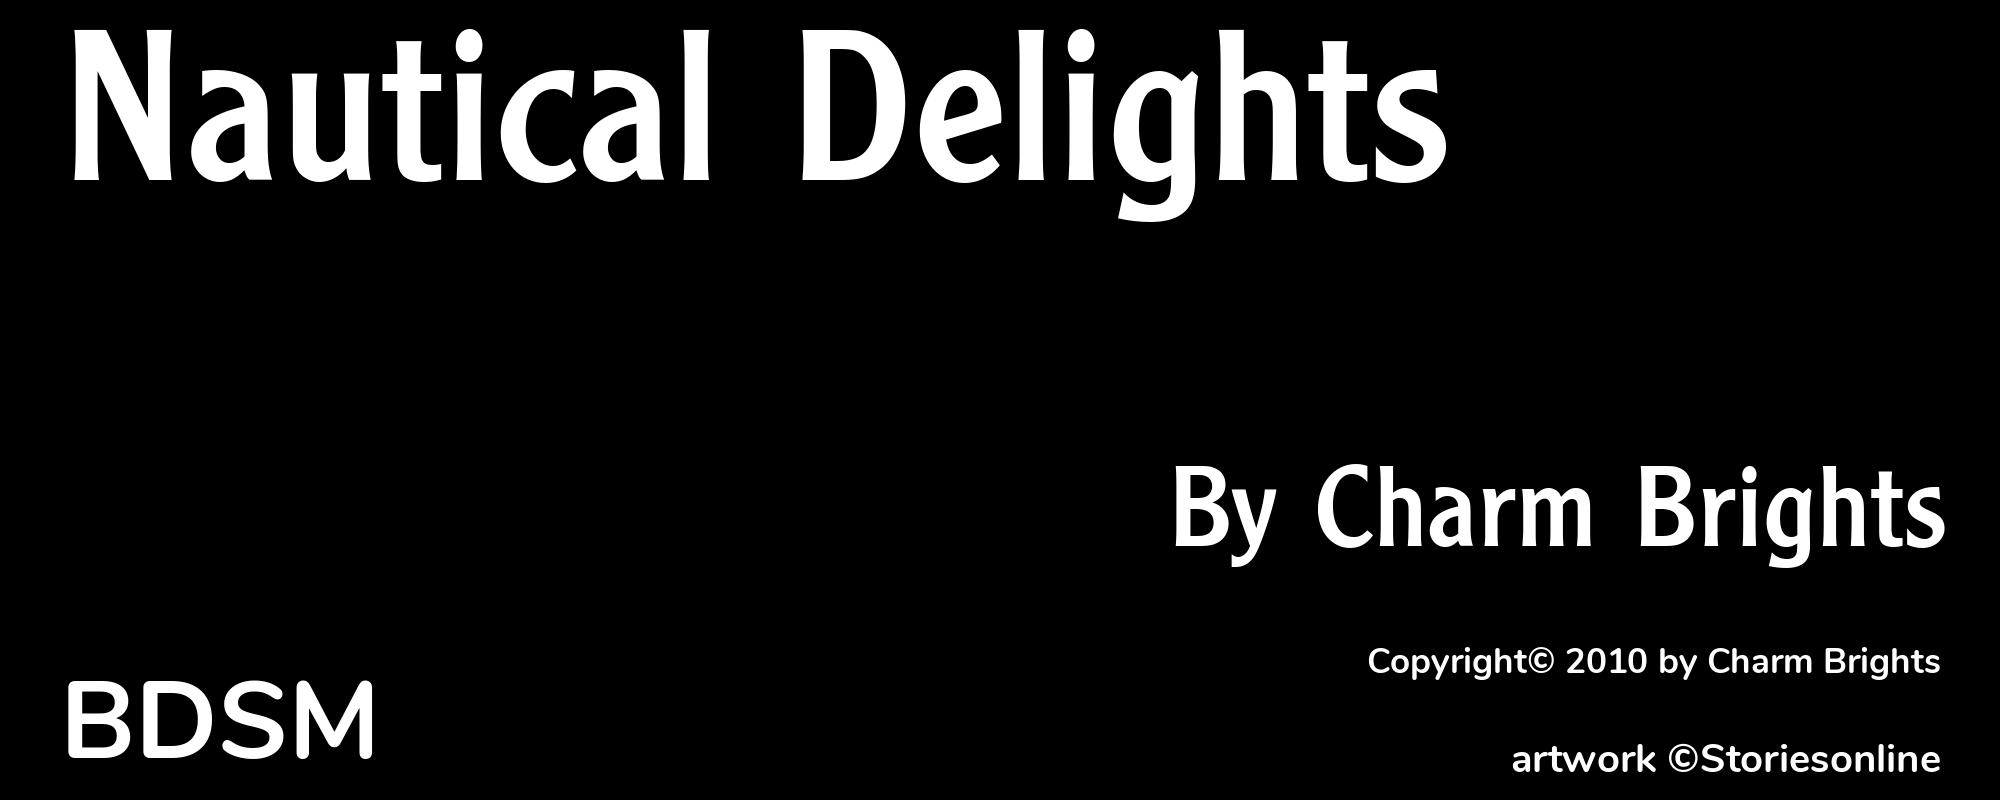 Nautical Delights - Cover